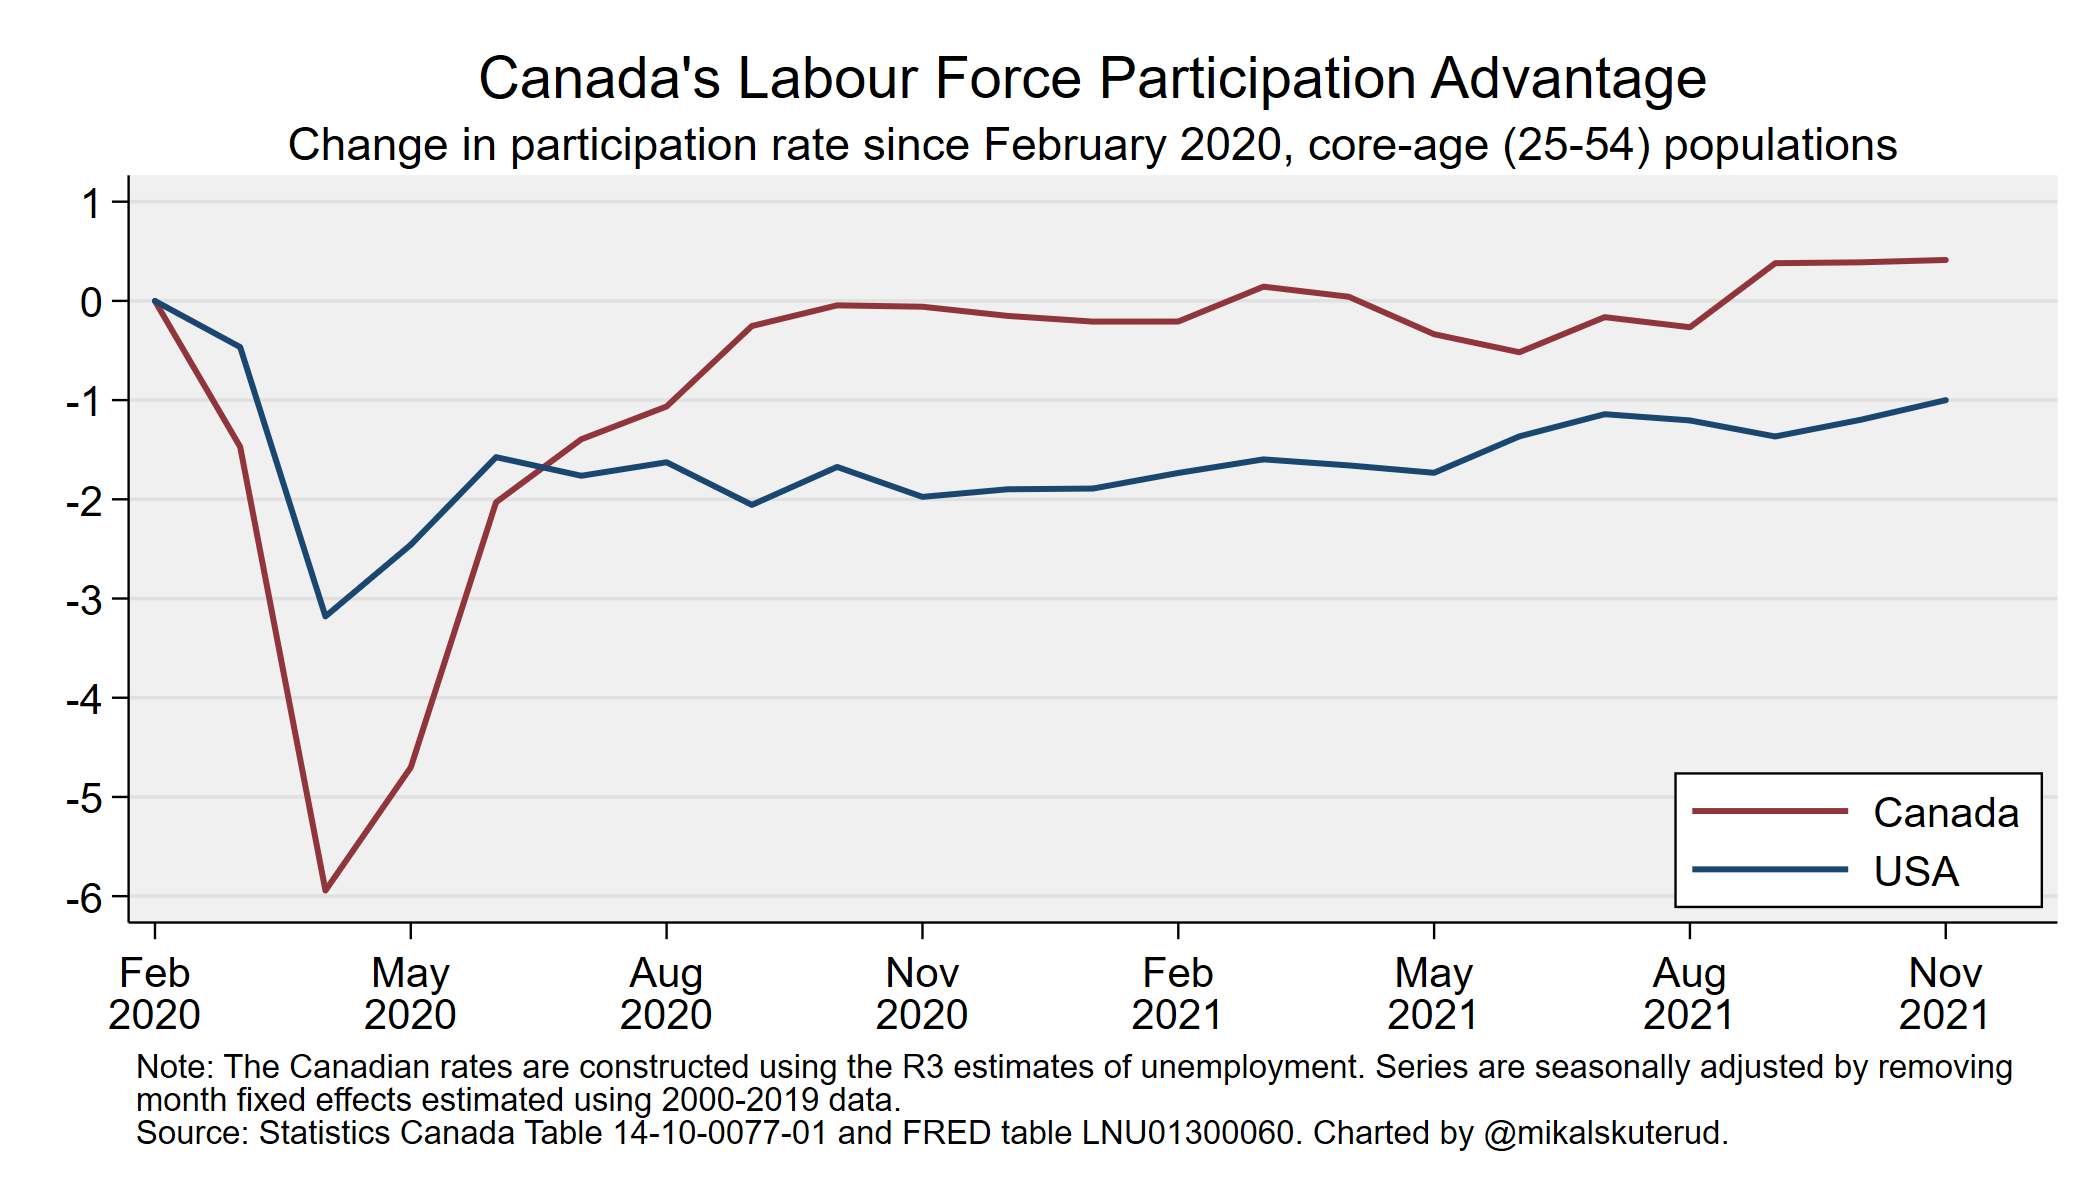 Skuterud chart on labor force participation in Canada vs the US